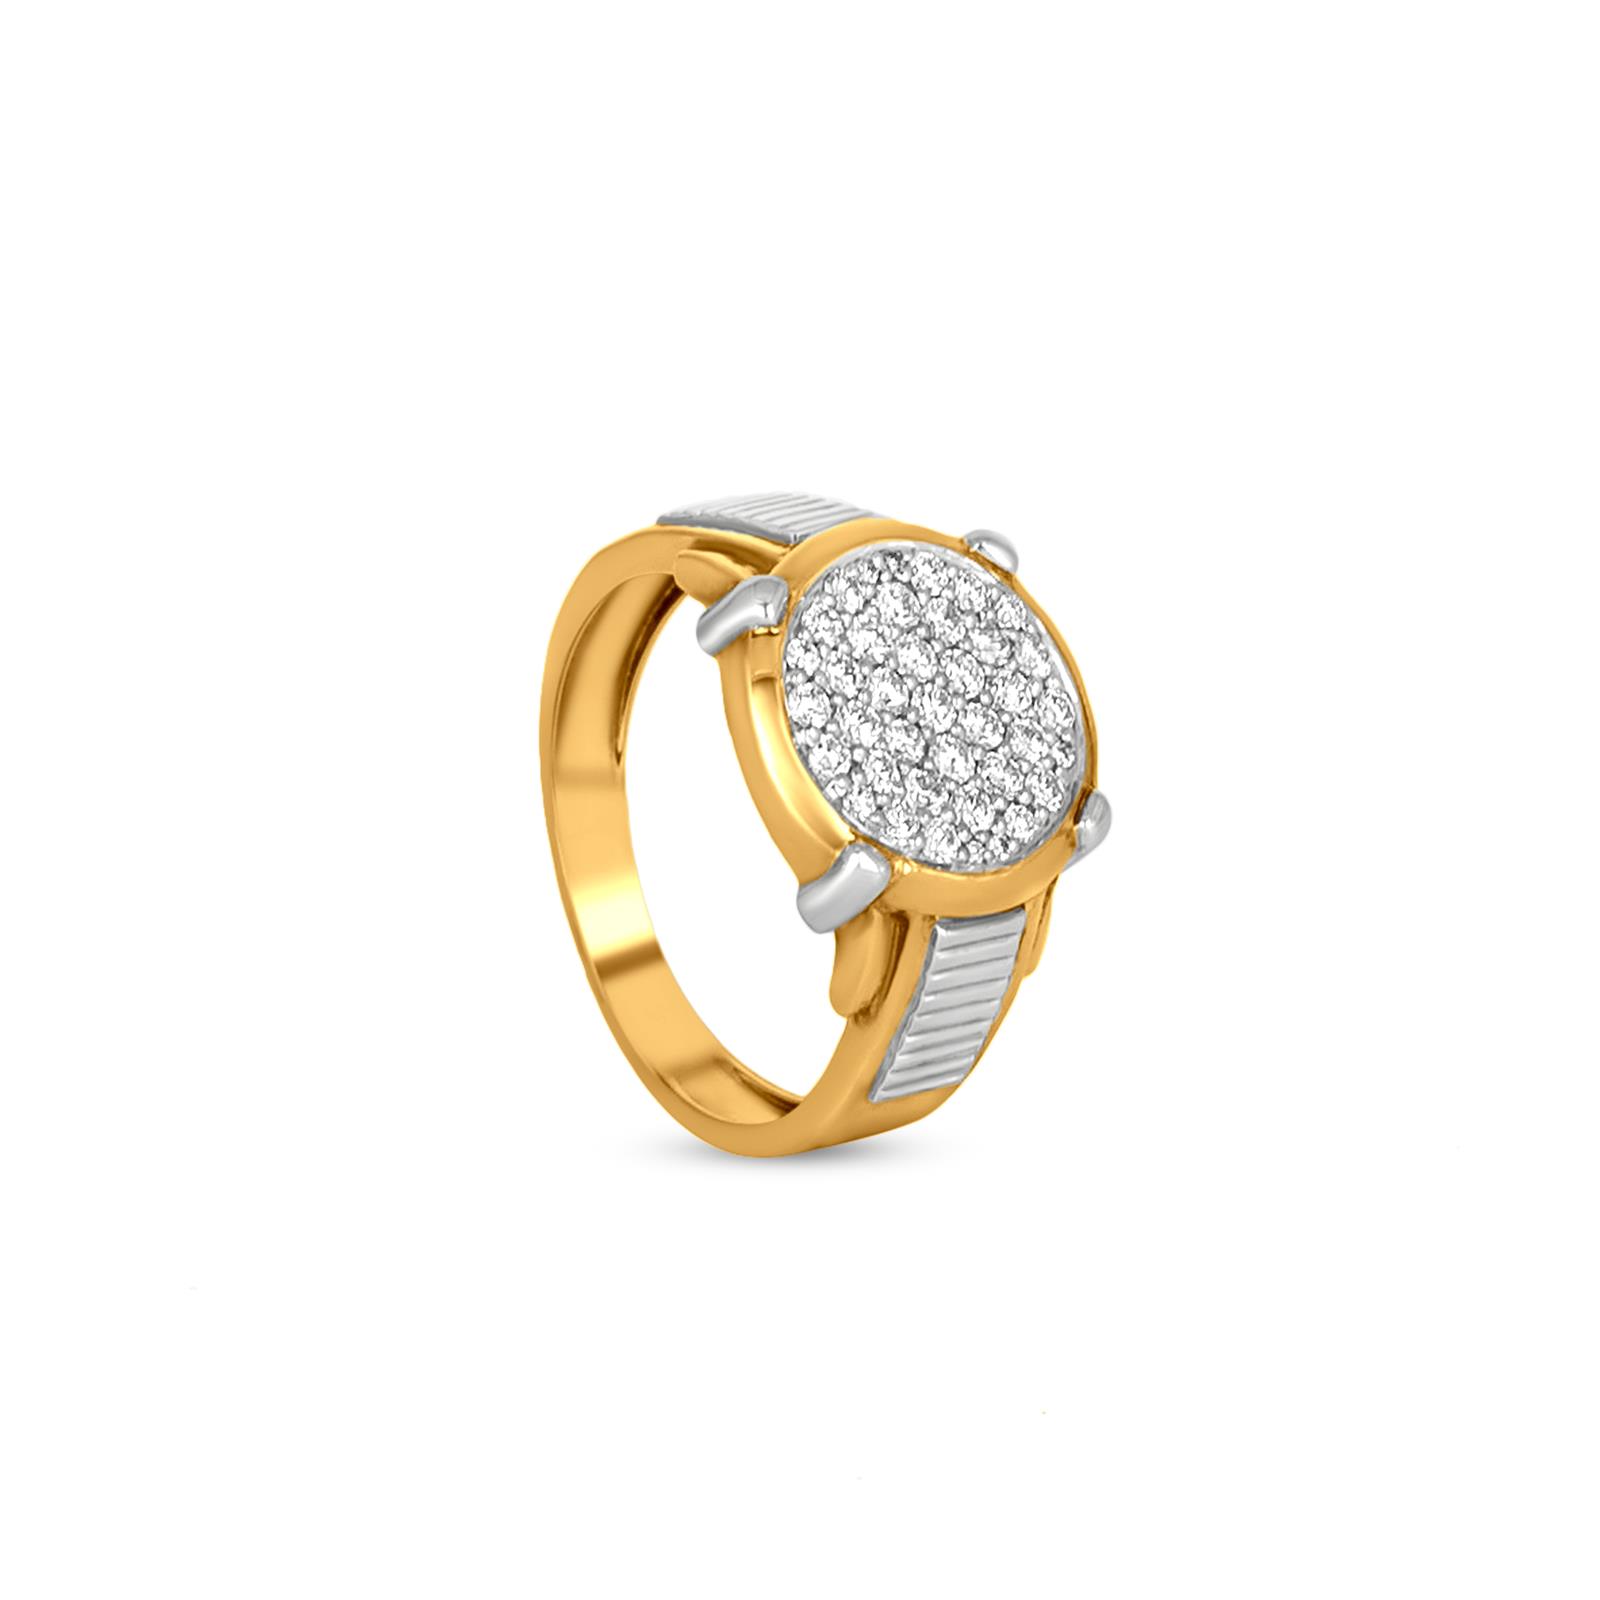 0.30 carat 18K Gold - THE NYSA RING at Best Prices in India |  SarvadaJewels.com